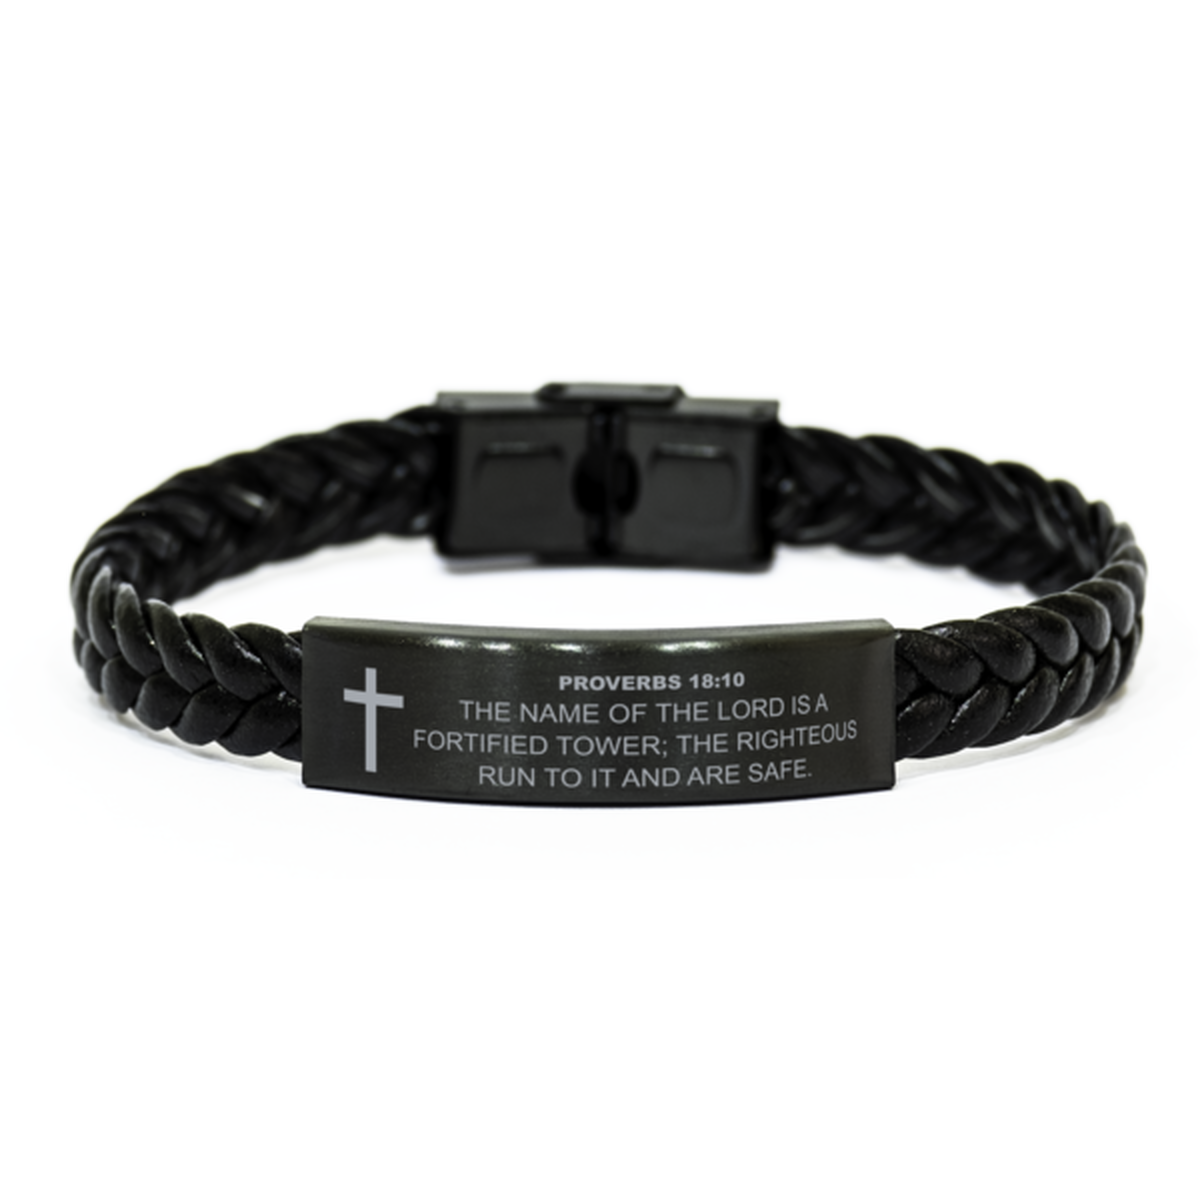 Proverbs 18:10 Bracelet, The Name Of The Lord Is A Fortified Tower, Bible Verse Bracelet, Christian Bracelet, Braided Leather Bracelet, Easter Gift